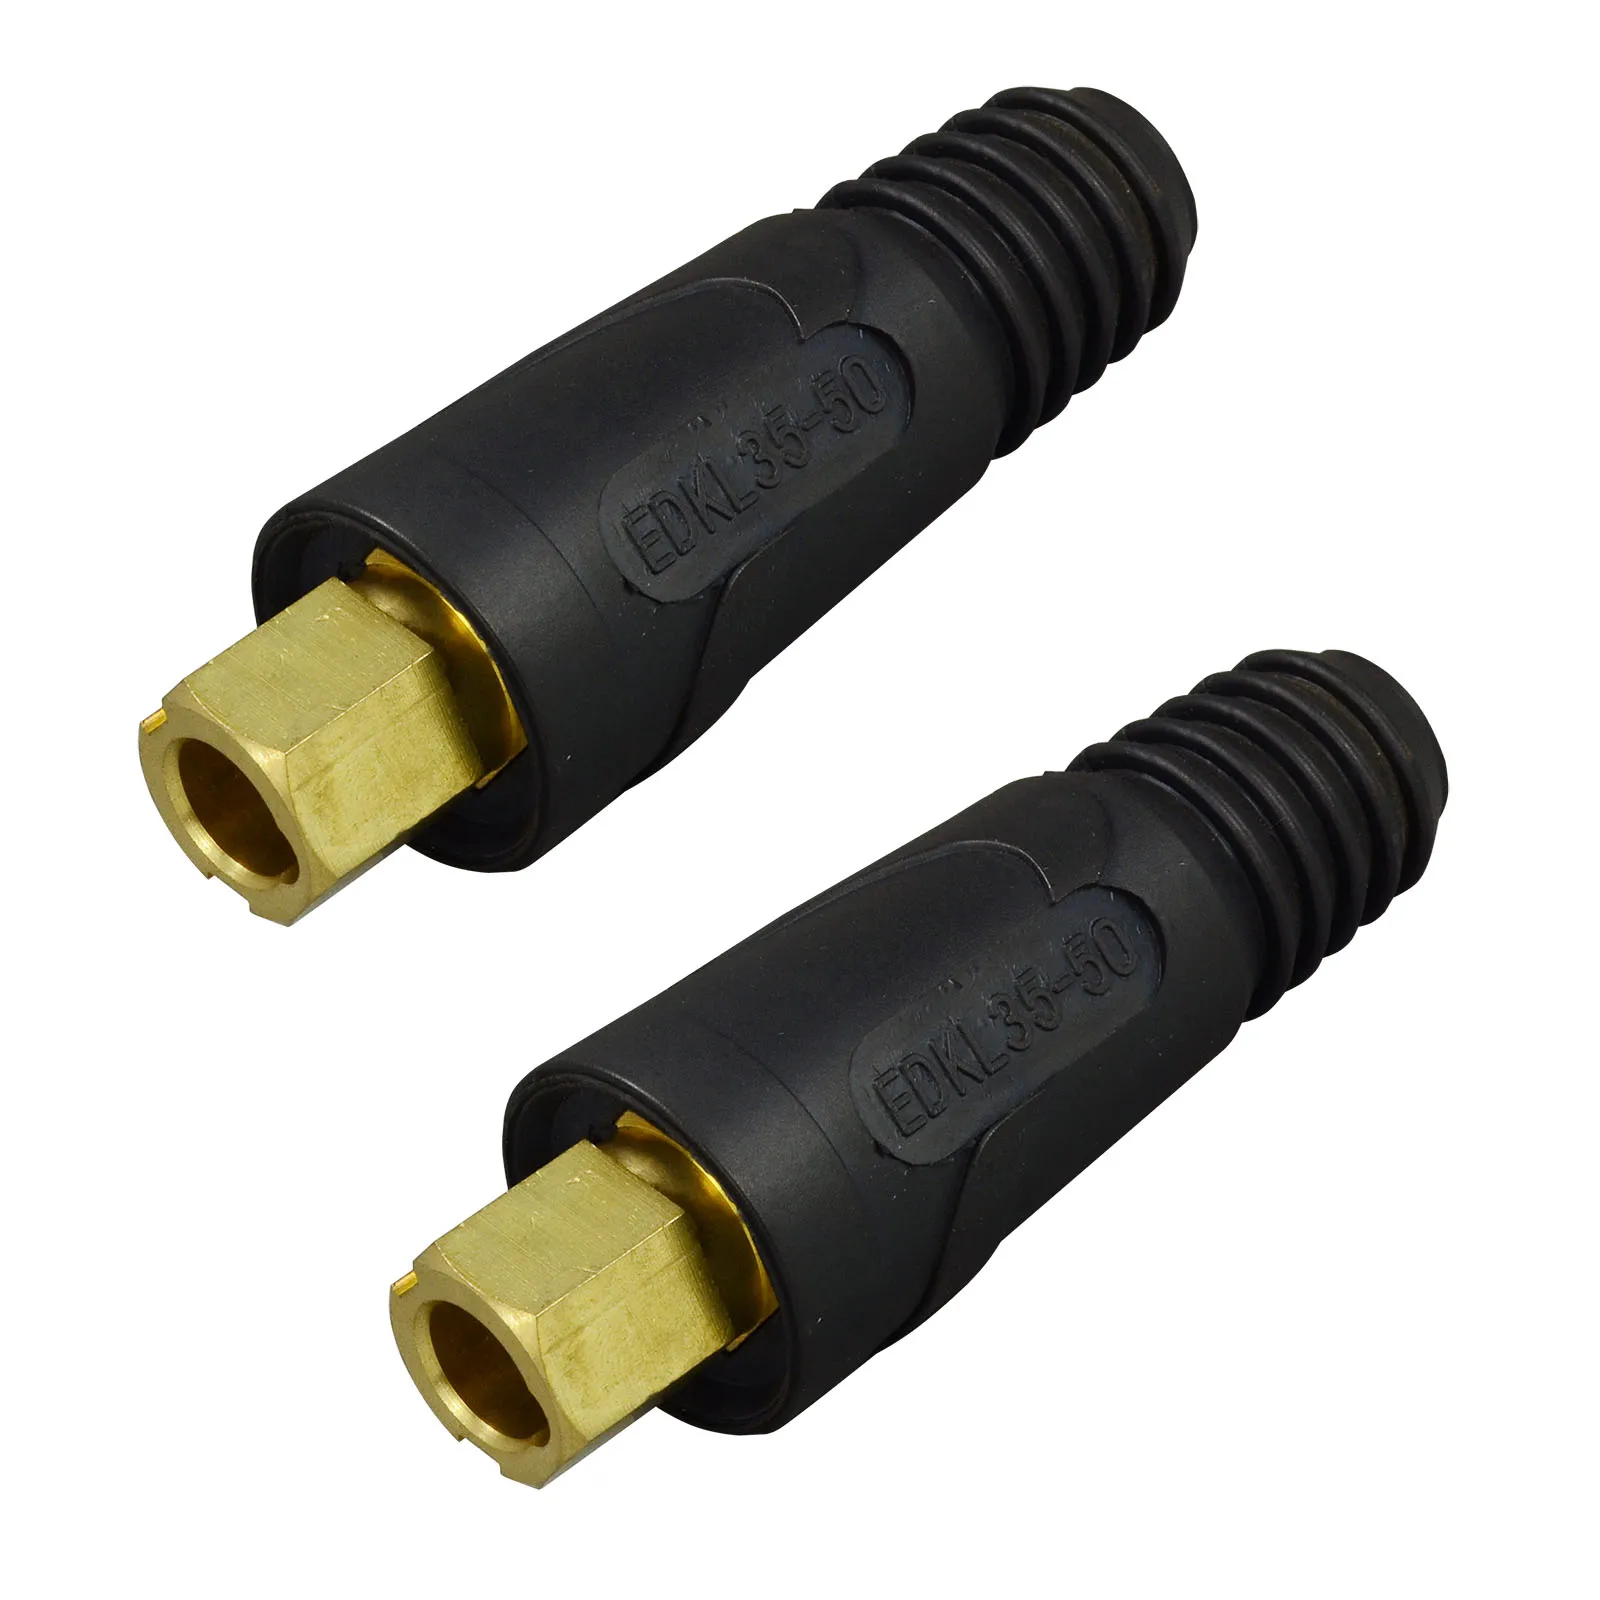 #4-#1 KINGQ Welding Cable Joint Quick Connector Pair DINSE-Style 200Amp-300Amp 35-50 SQ-MM 2-set 